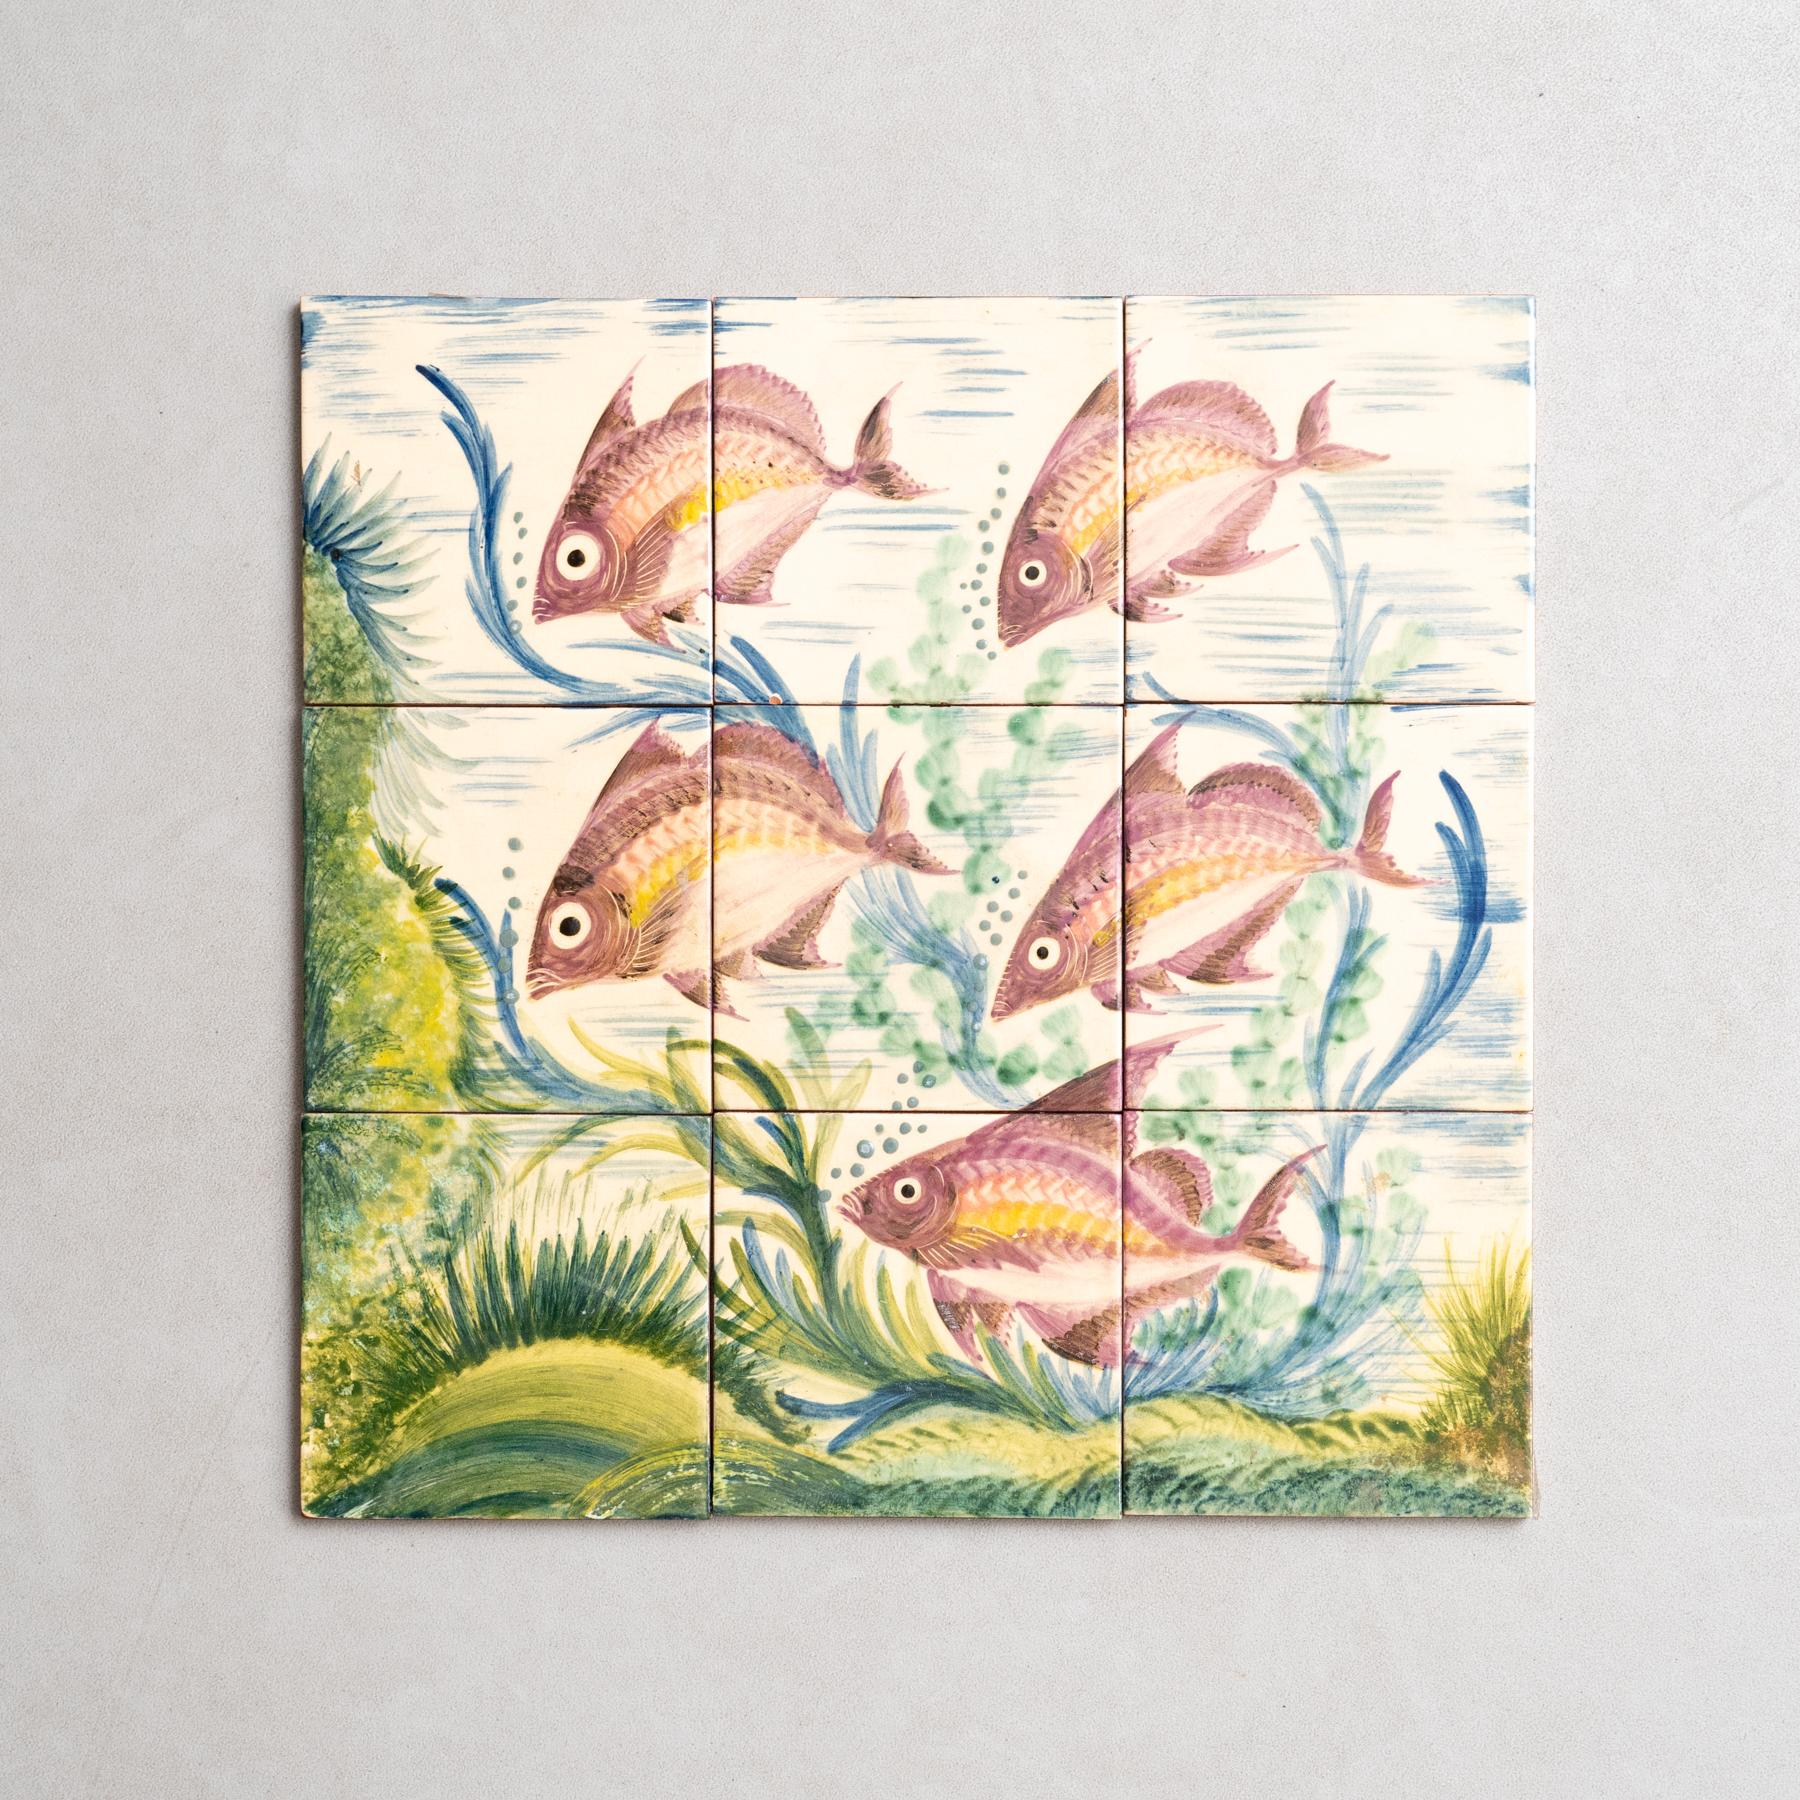 Ceramic hand painted large artwork of fishes by Catalan artist Diaz Costa, circa 1960.
Framed. Signed.

In original condition, with minor wear consistent of age and use, preserving a beautiul patina.

Tiles come separated, not attached.